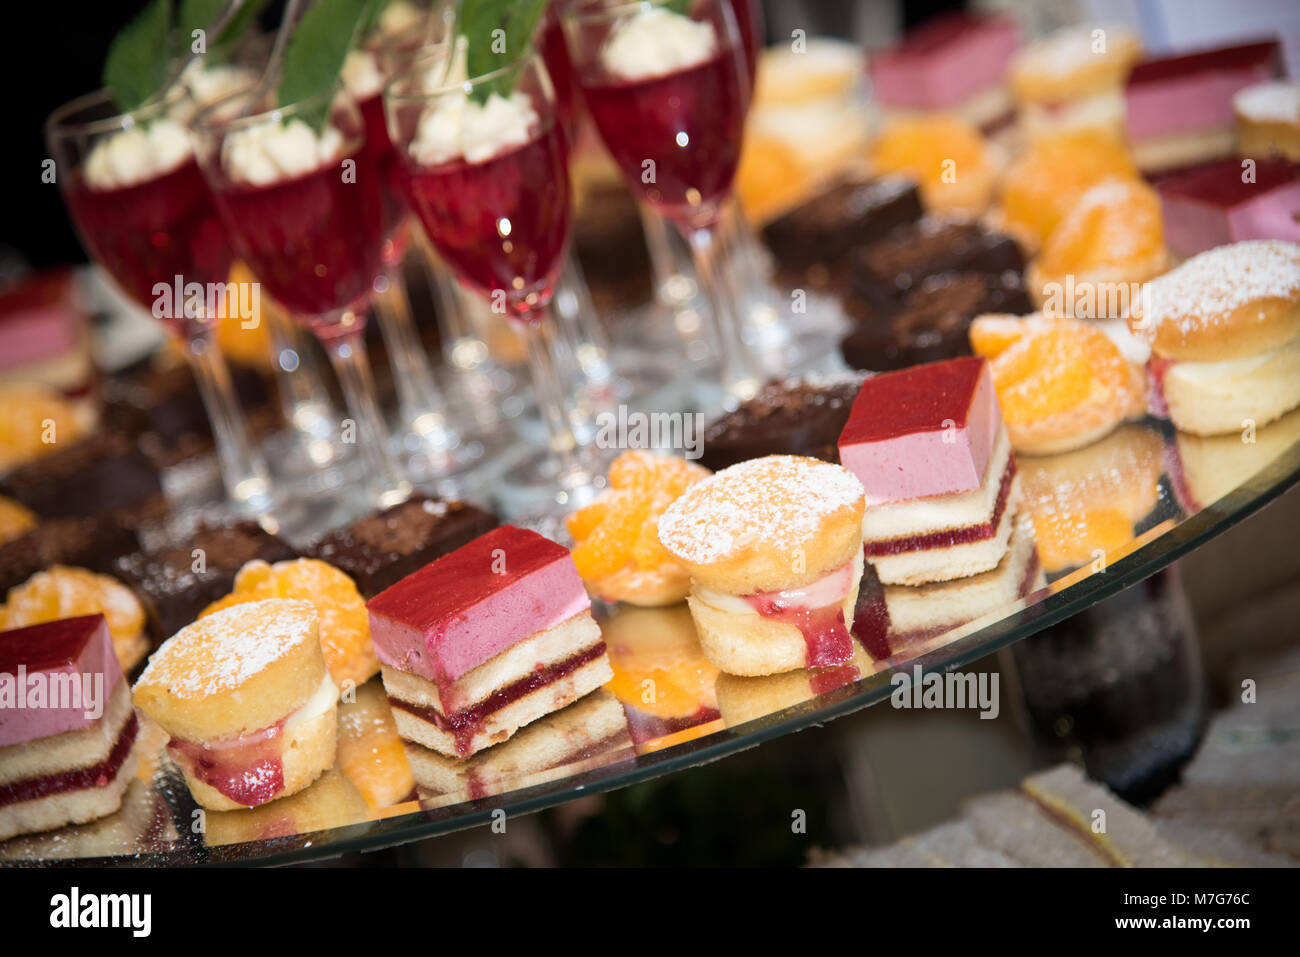 Dinner party desserts Stock Photo